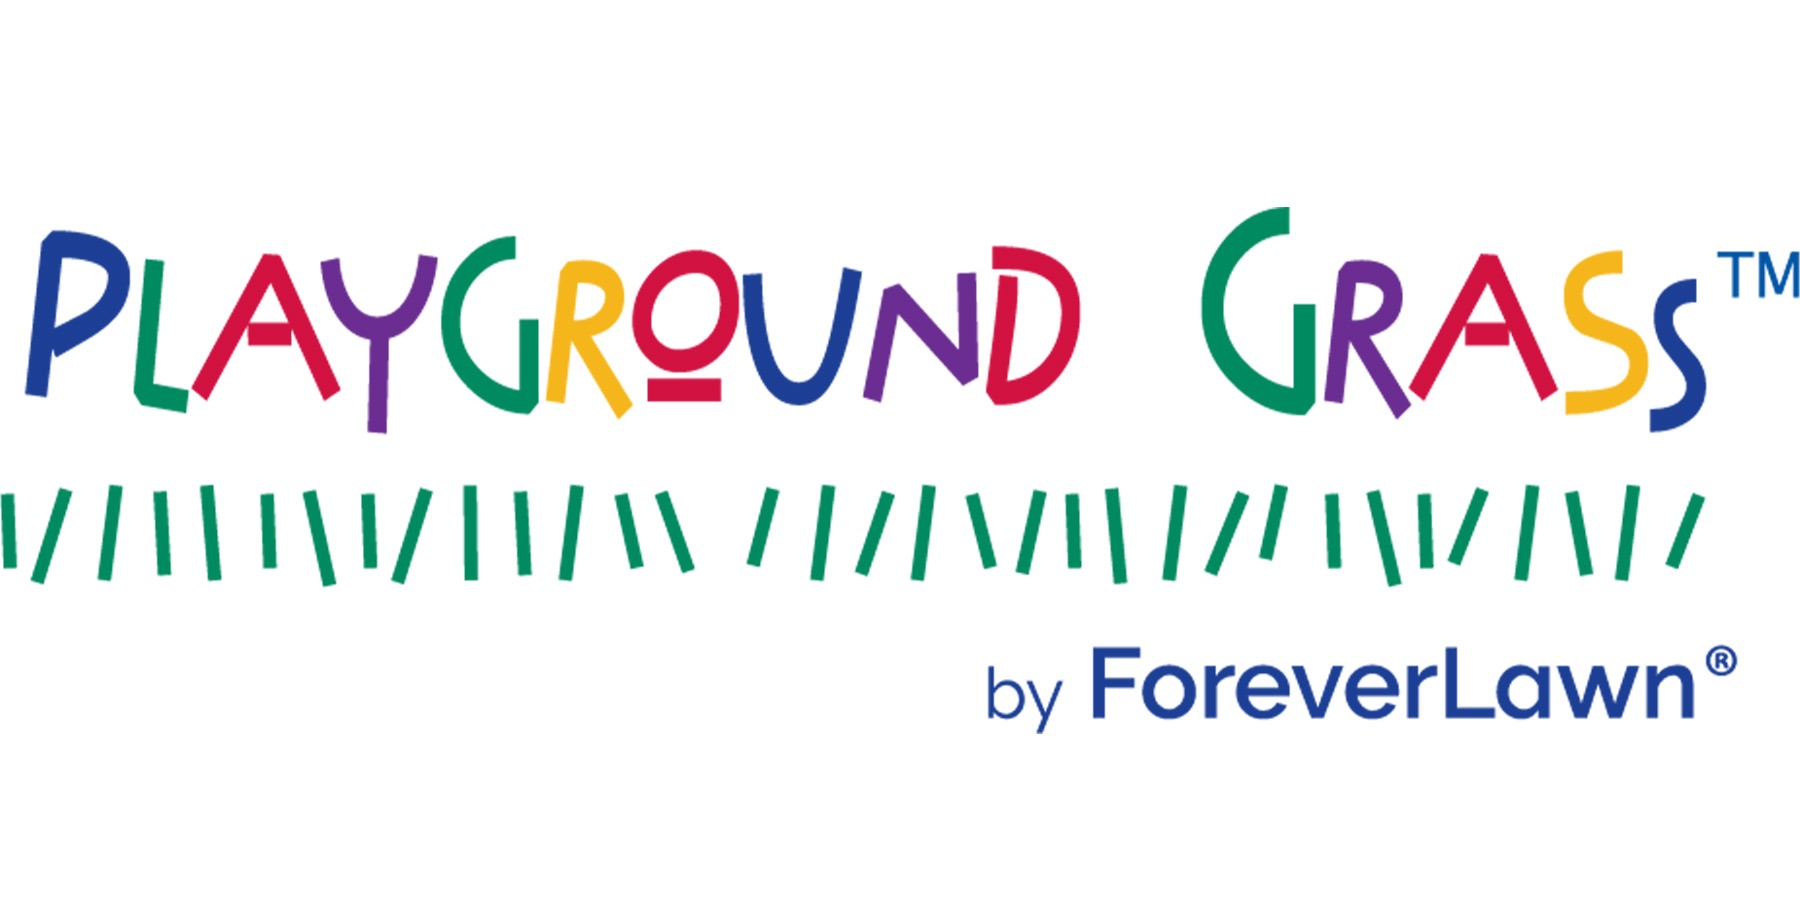 Playgound Grass by Forever Lawn logo